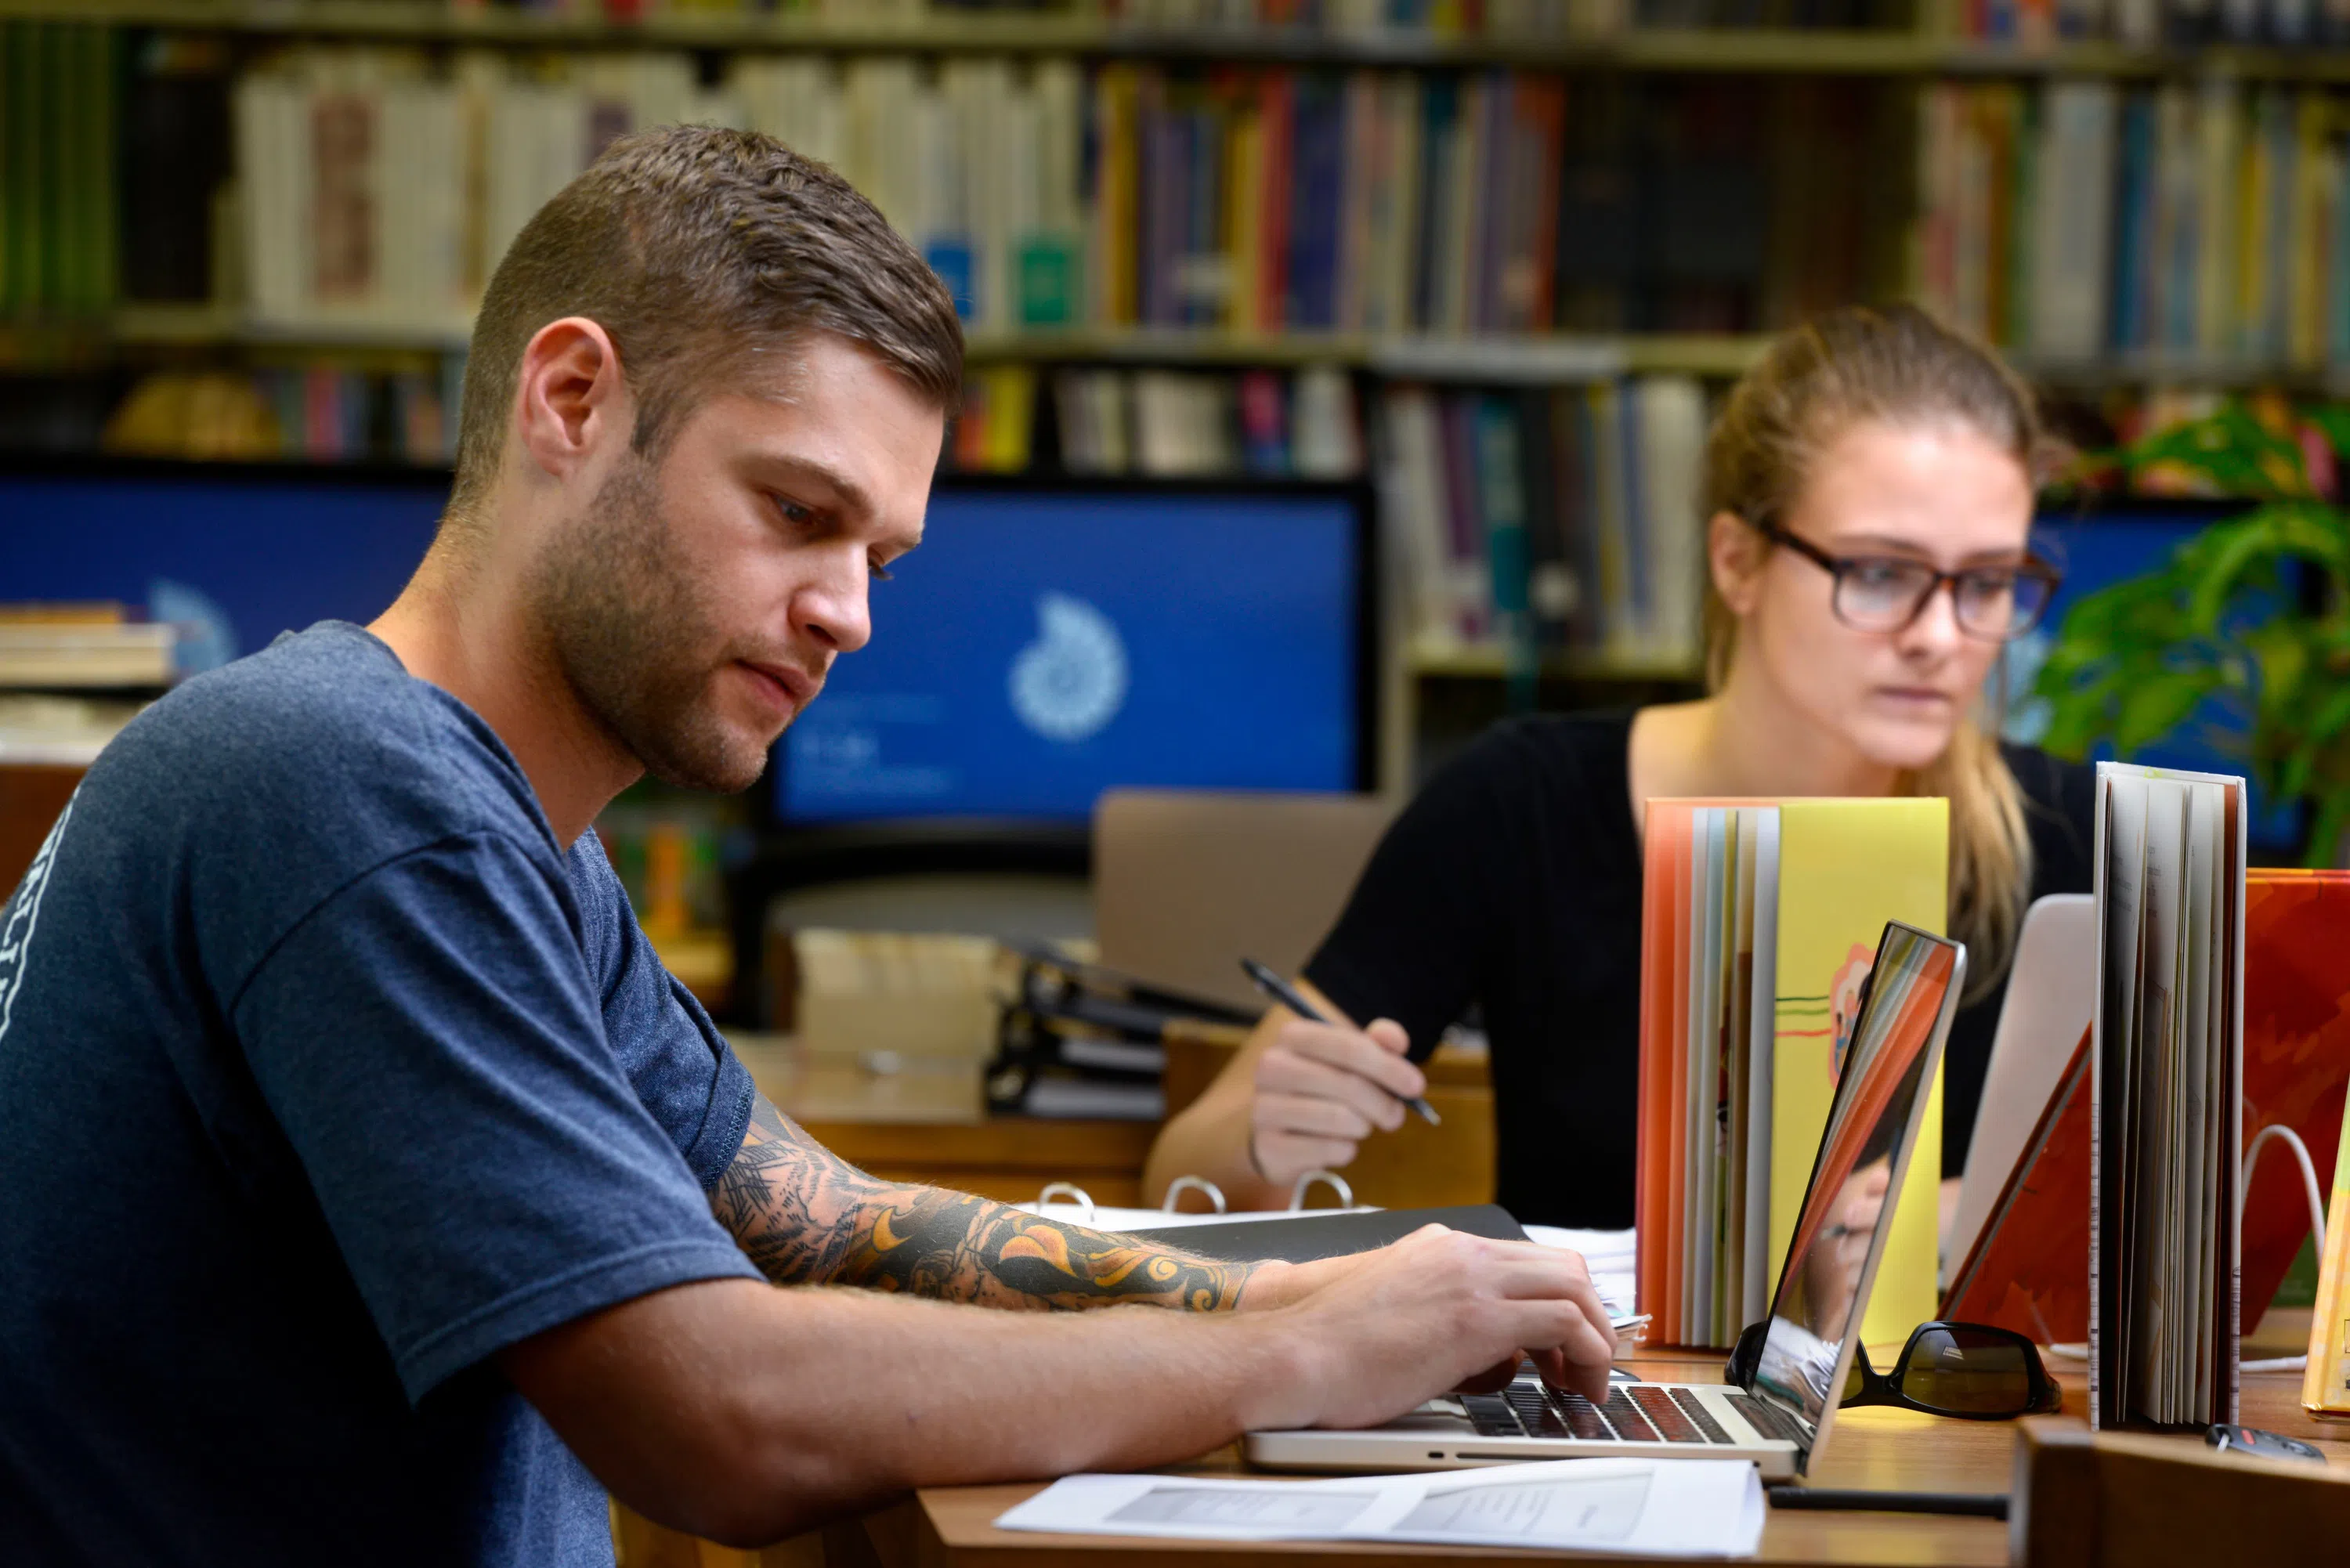 Two students study in the School of Education Library